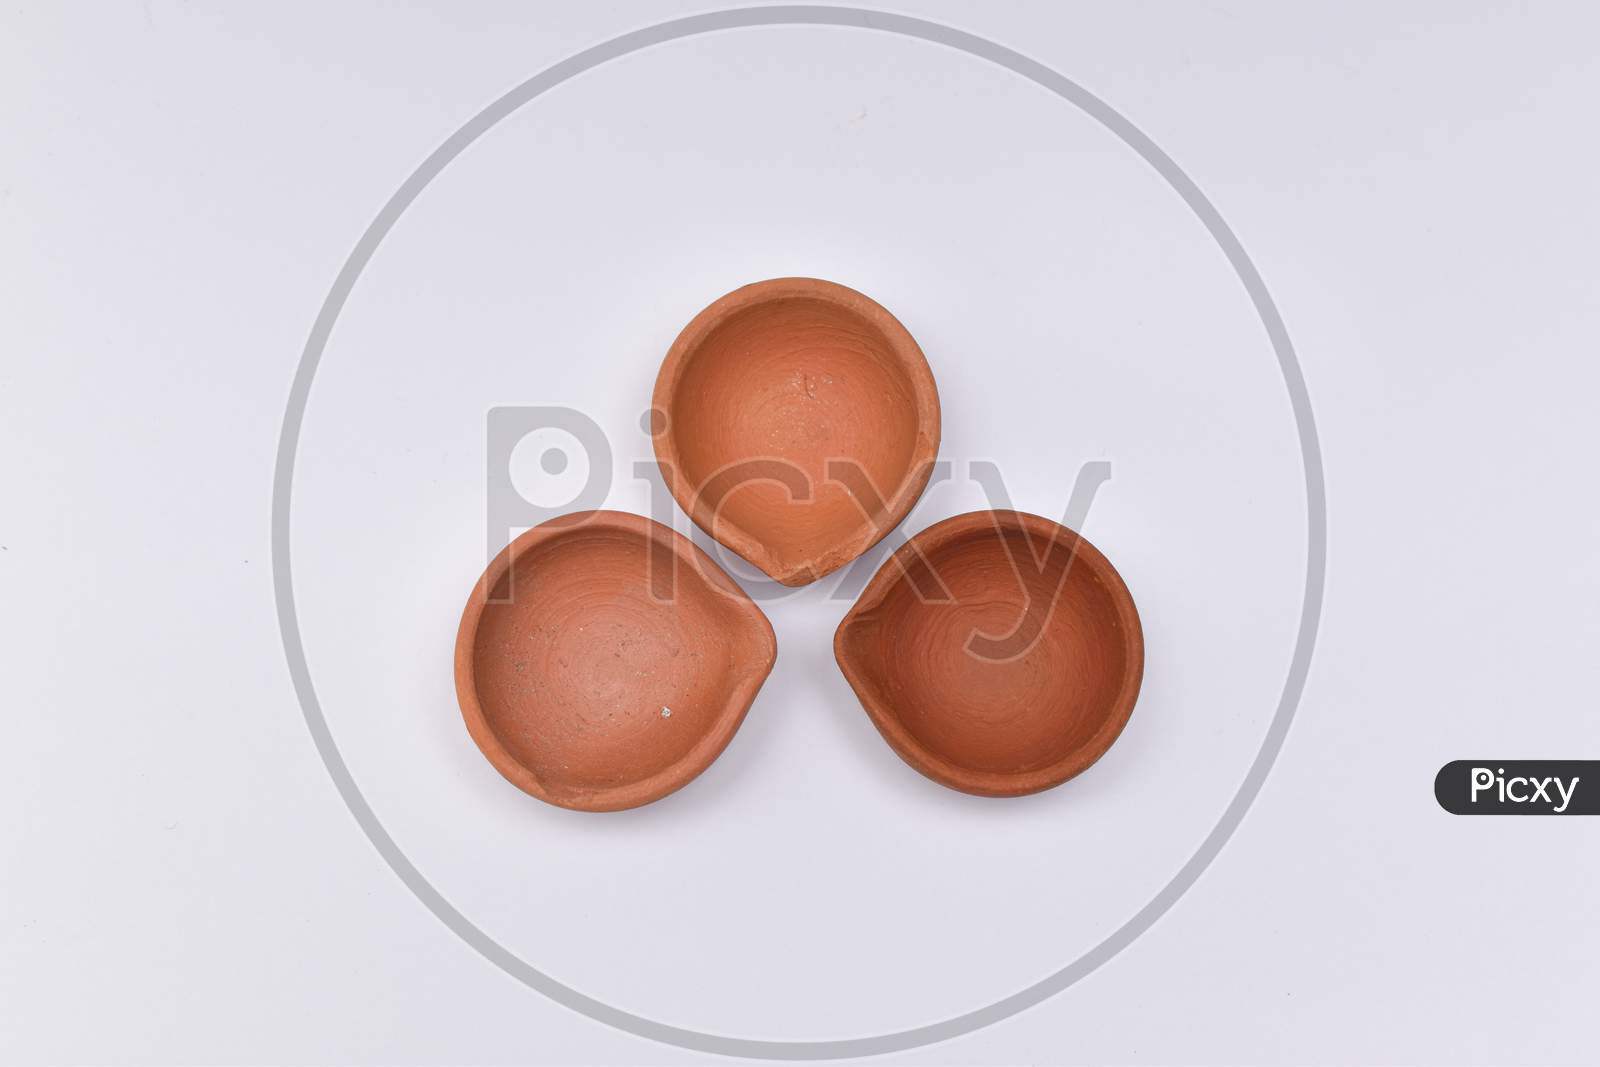 Closeup Shot Of Three Diyas Or Oil Lamp For Diwali With White Background